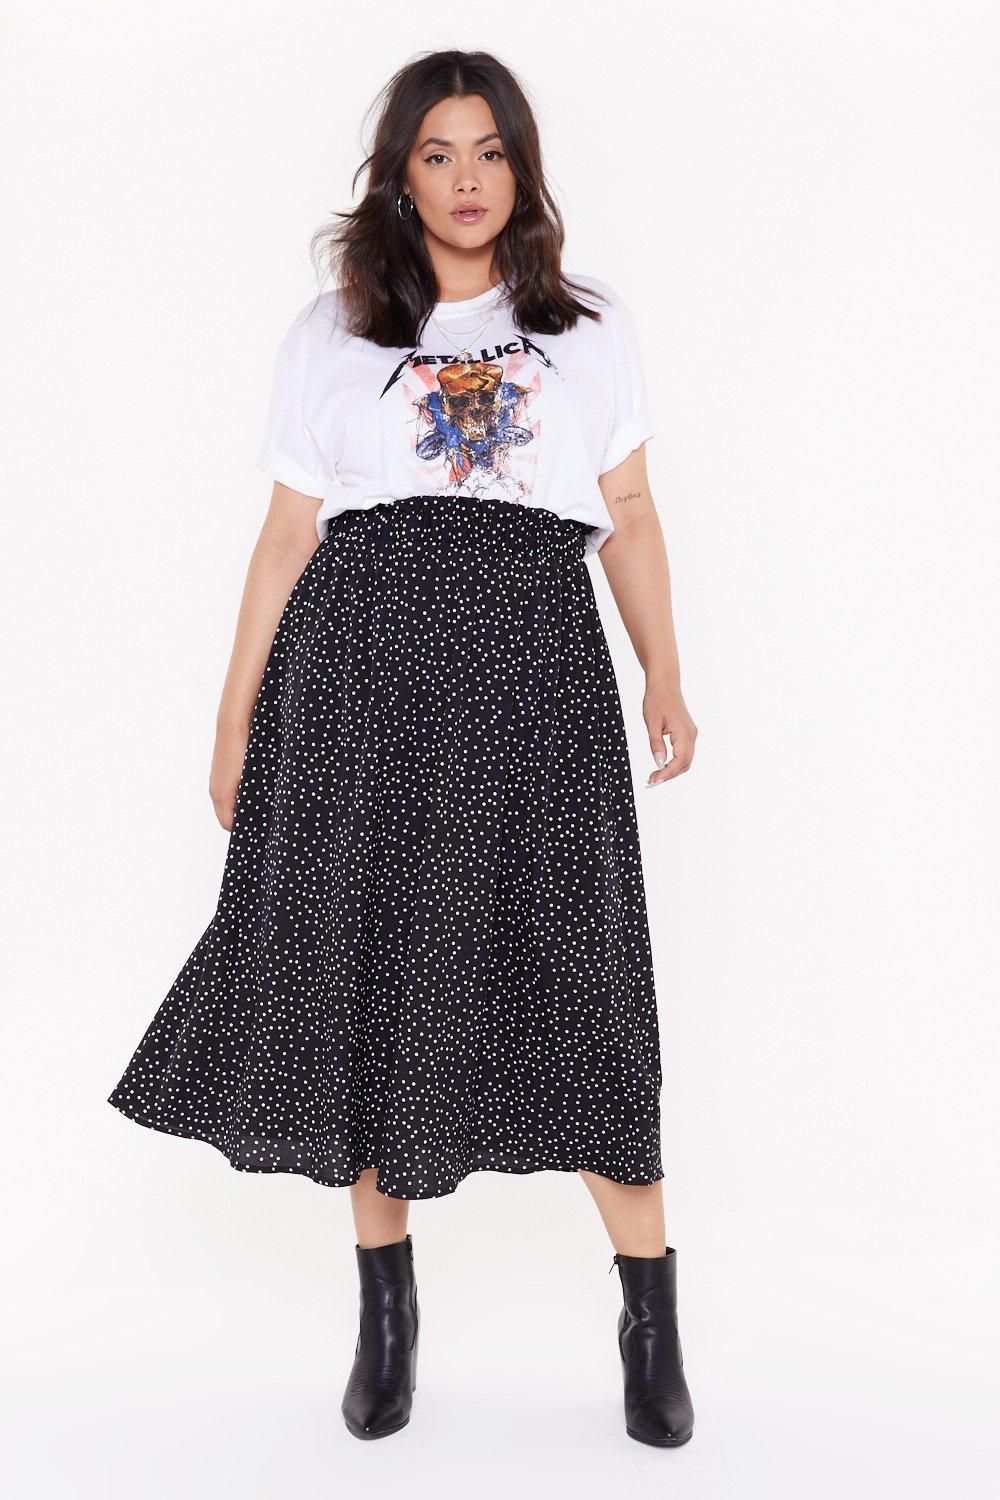 Curvy Chic: Plus Size Skirts for Flattering Silhouettes